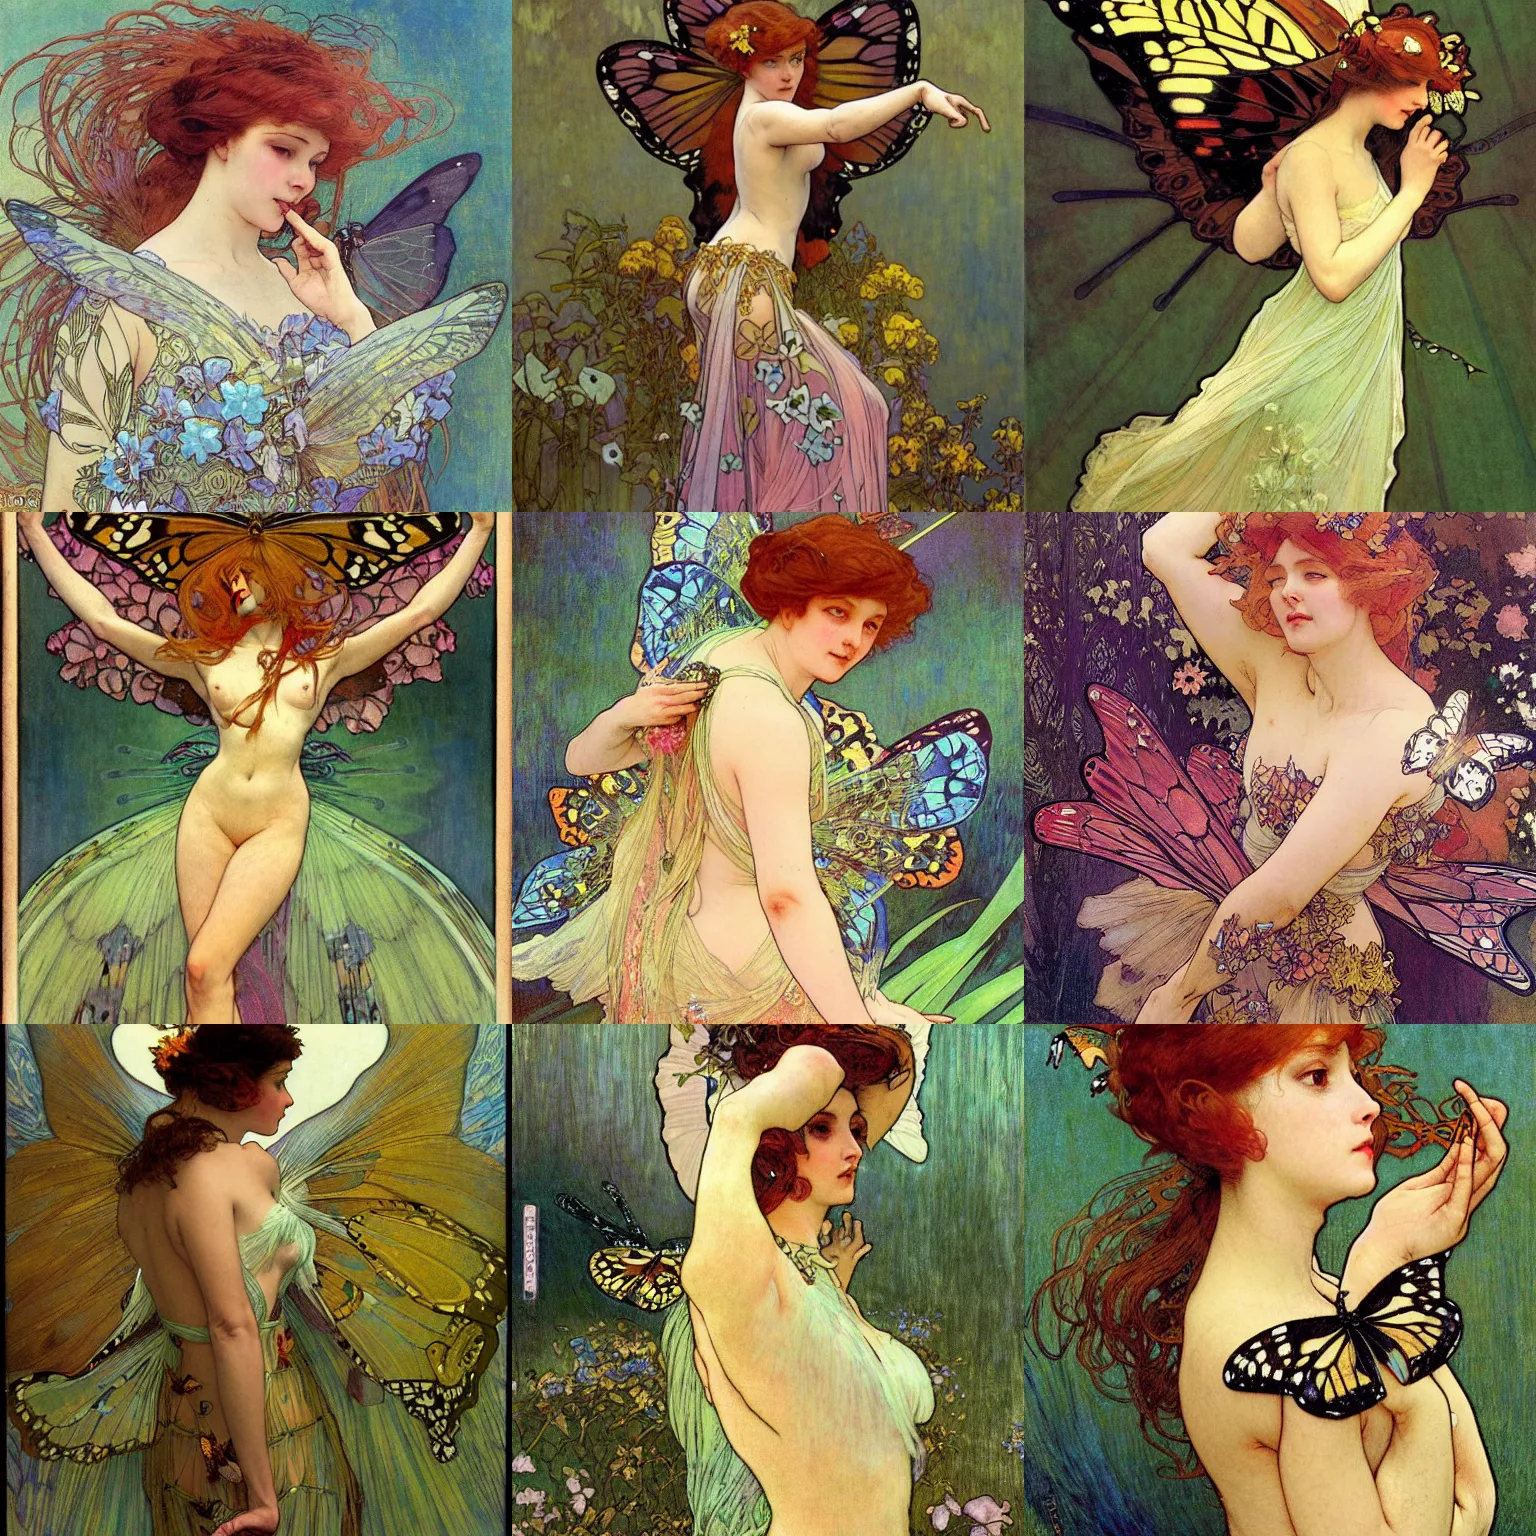 Prompt: a woman wearing an elaborate dress sprouts butterfly wings, mid-transformation, half-woman half-butterfly, as though she is dancing, fantasy illustration by ilya kuvshinov, edgar maxence, alphonse mucha, Gaston Bussiere